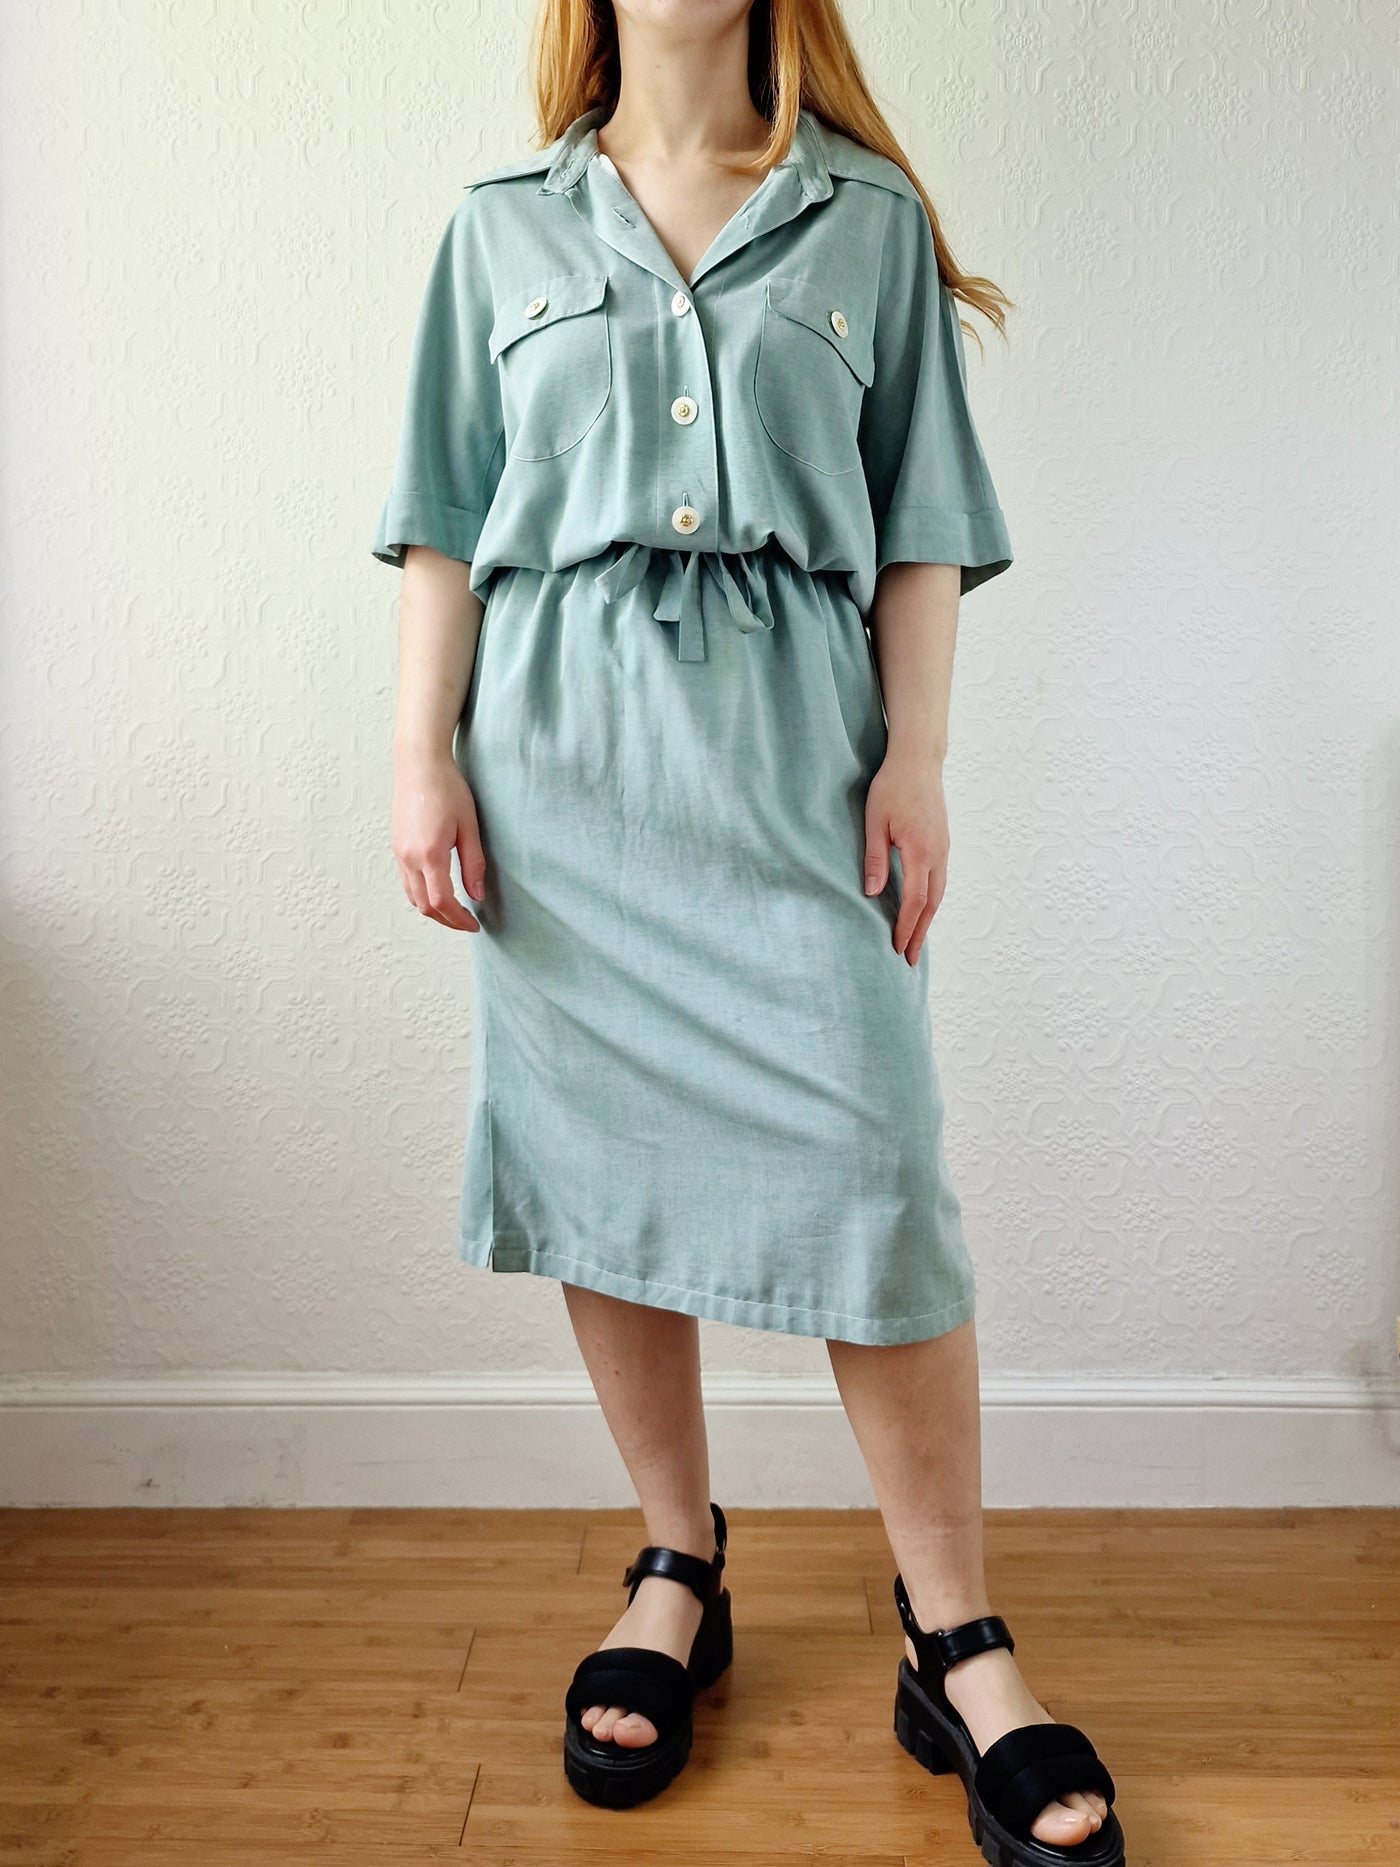 Vintage 80s Duck Egg Shirt Dress with Short Sleeves - S